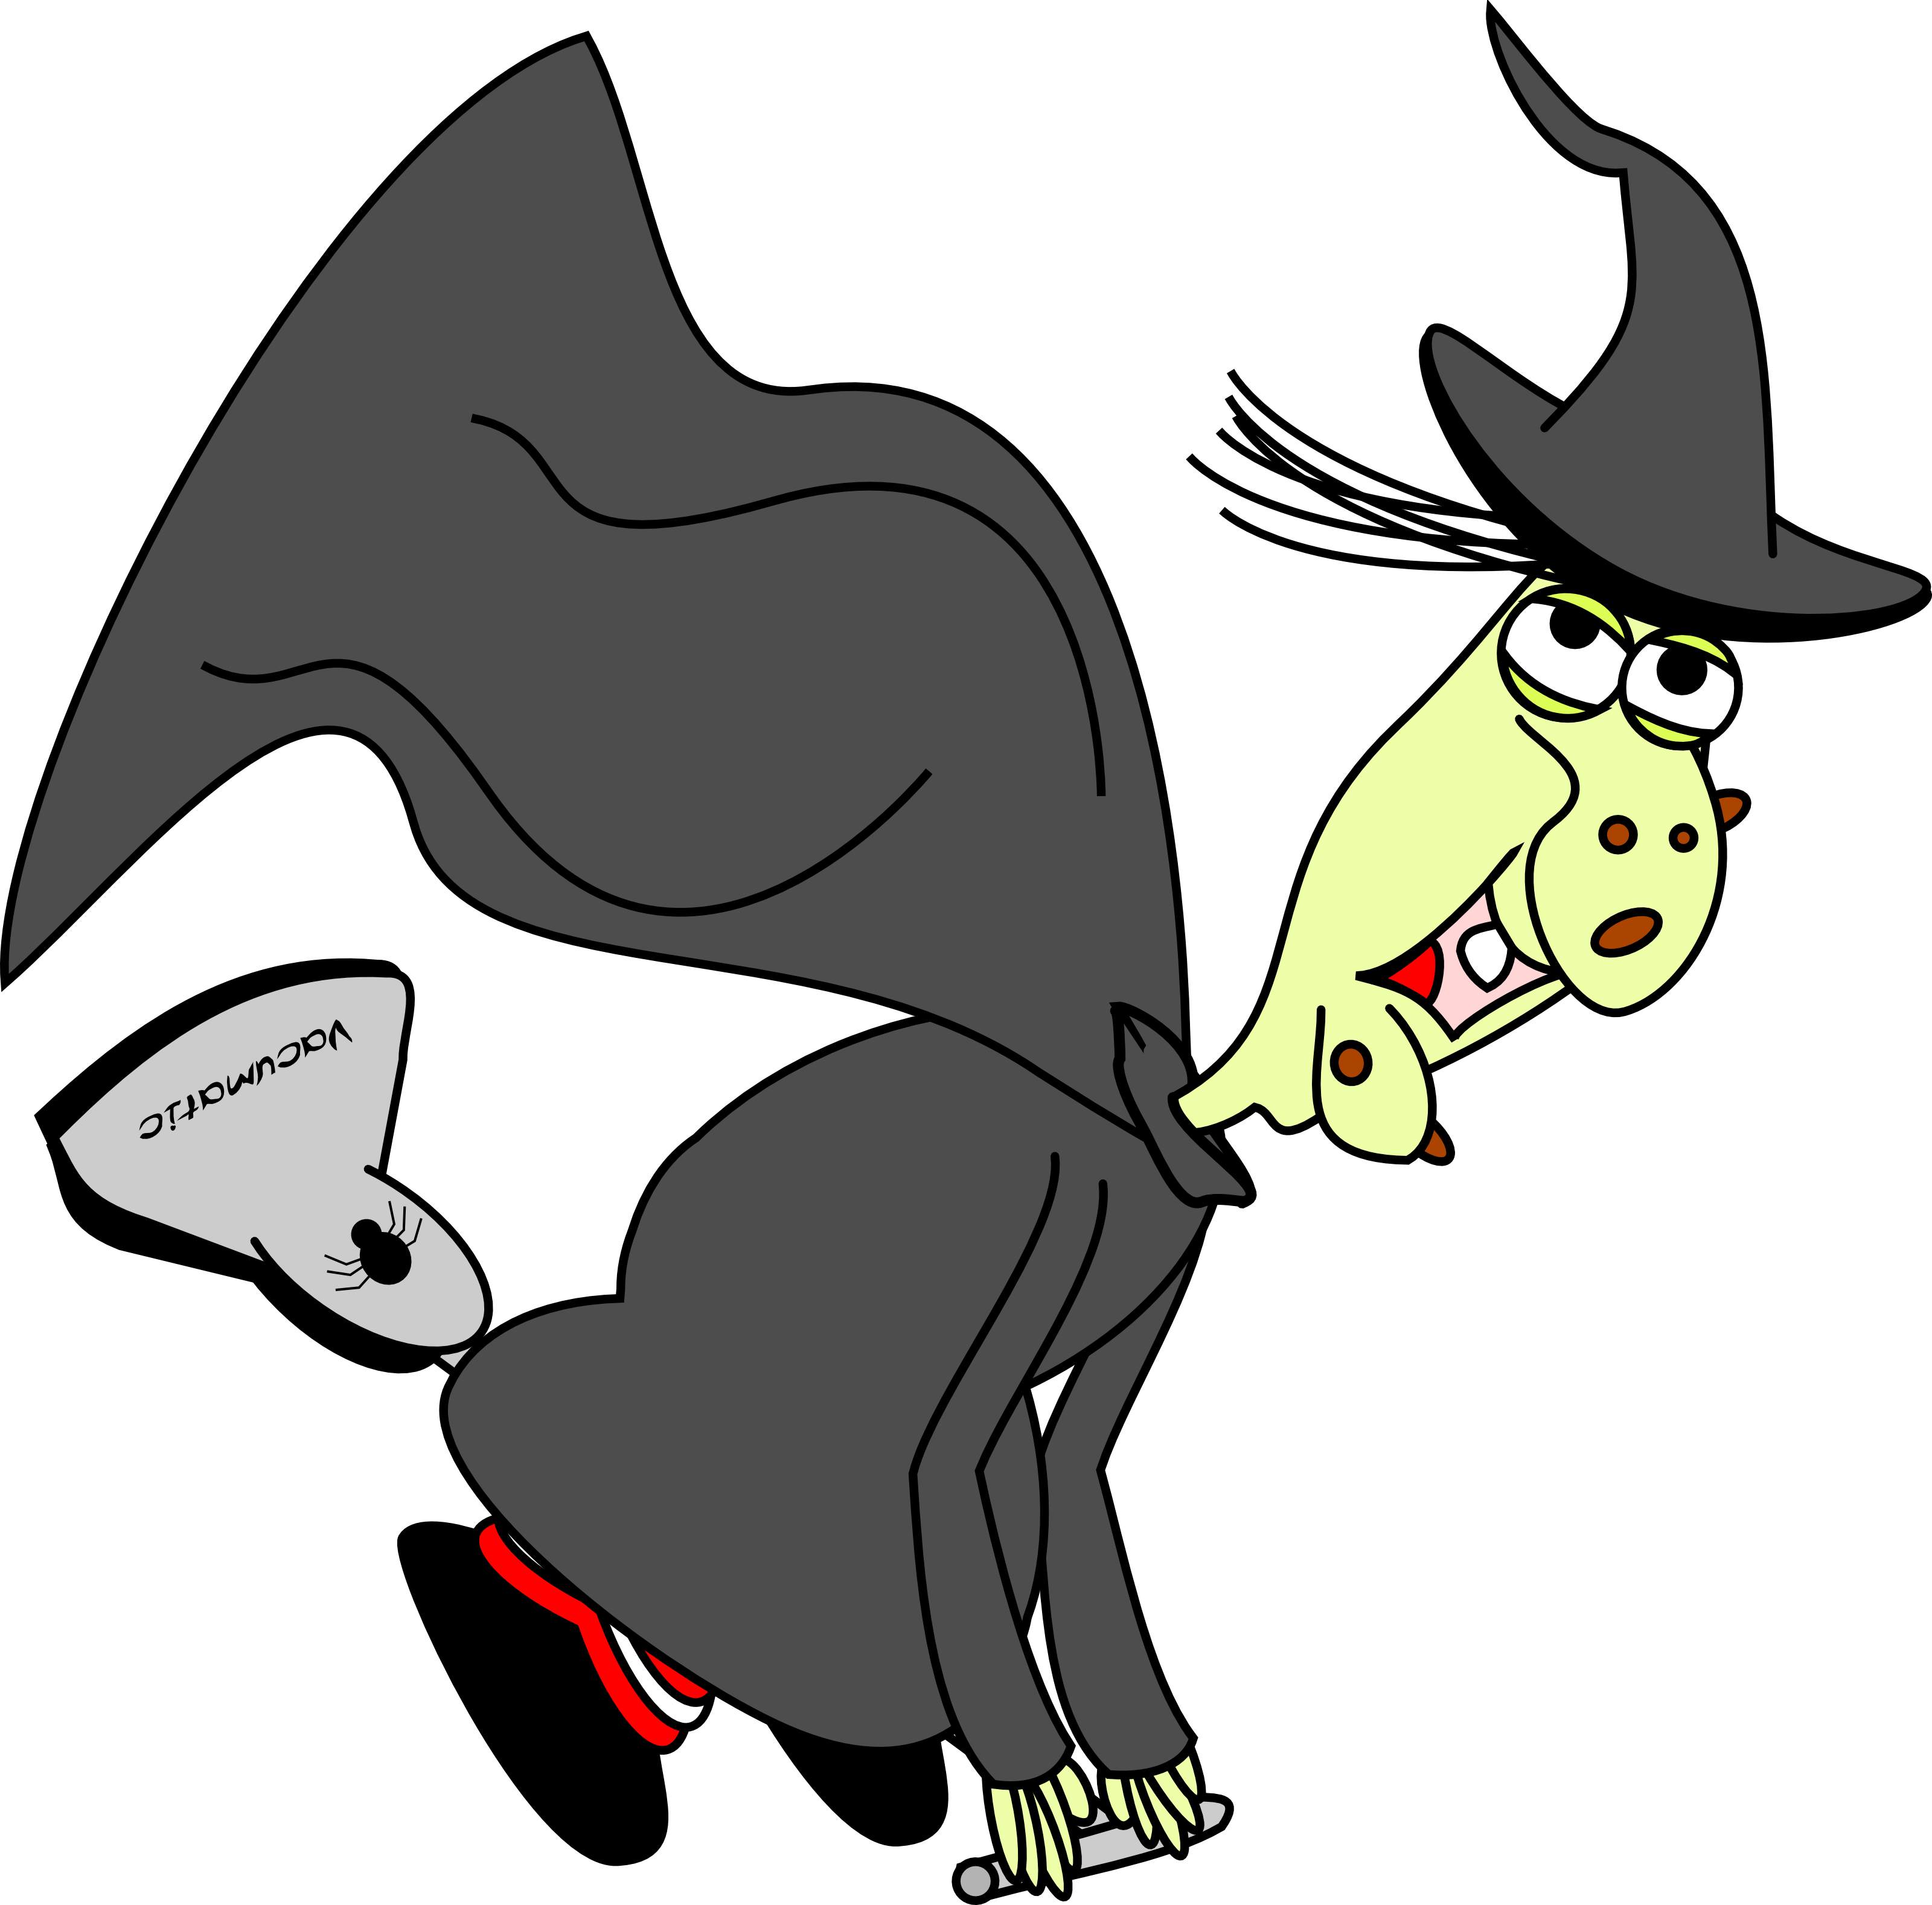 Halloween Witches Clip Art Free | Halloween Wallpapers 2014